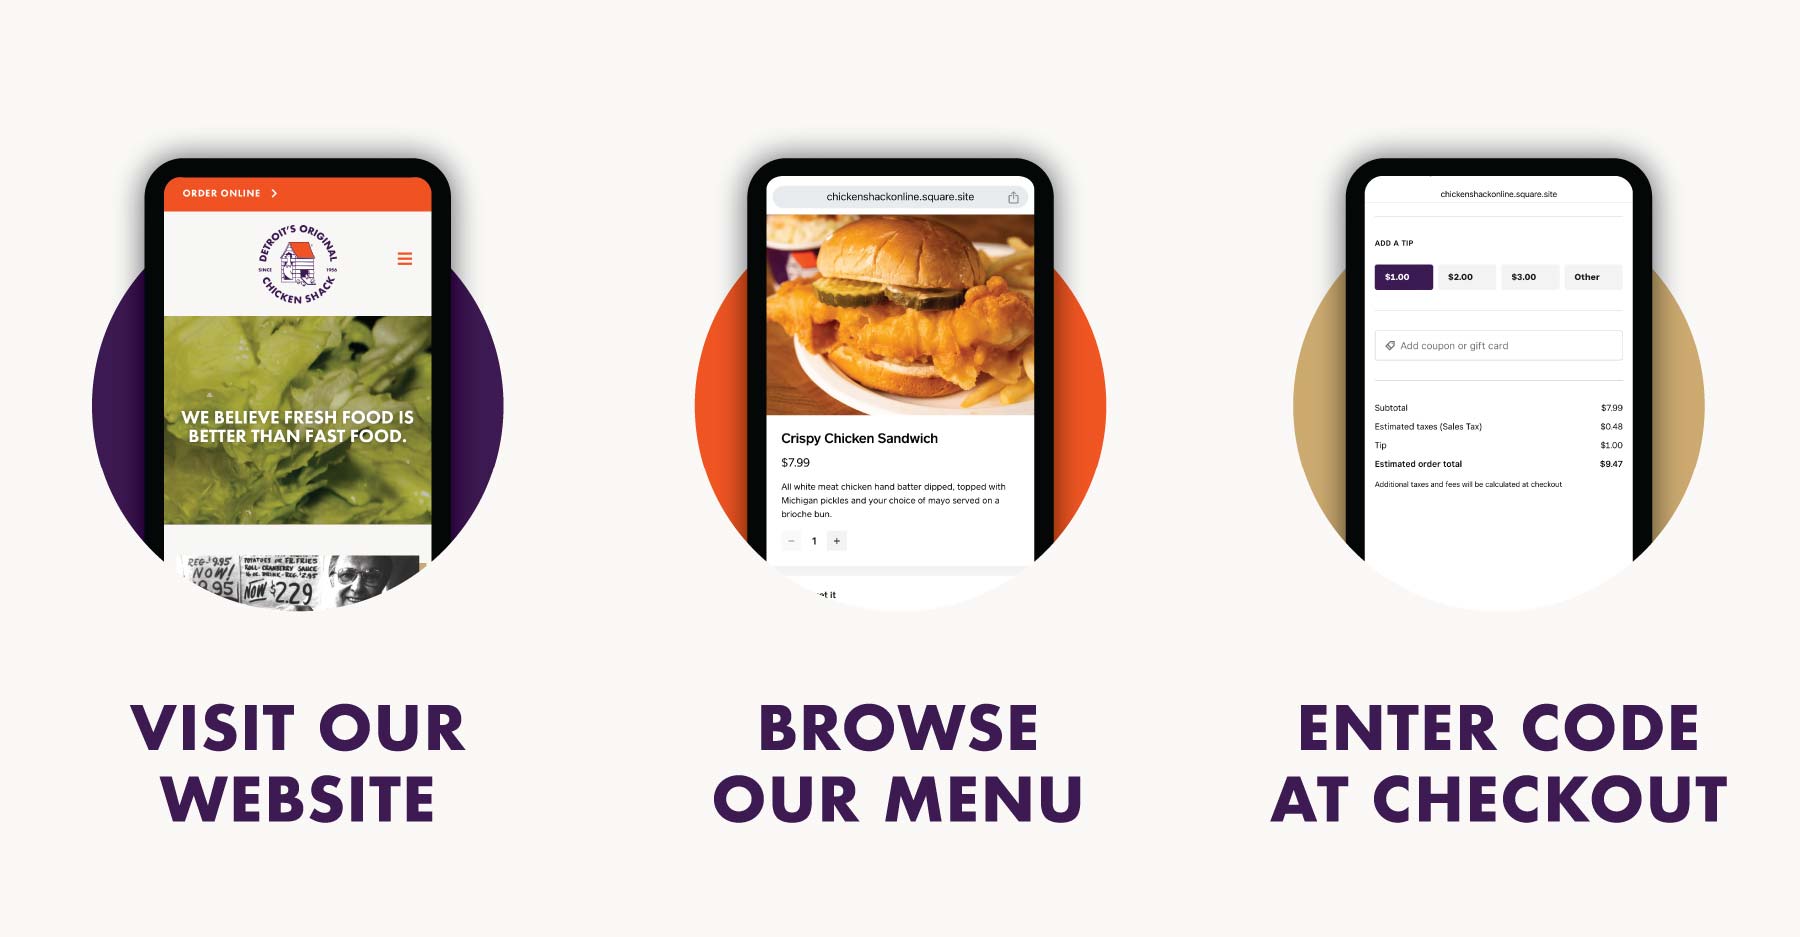 How to Order: Visit our website, browse our menu, enter code at checkout!